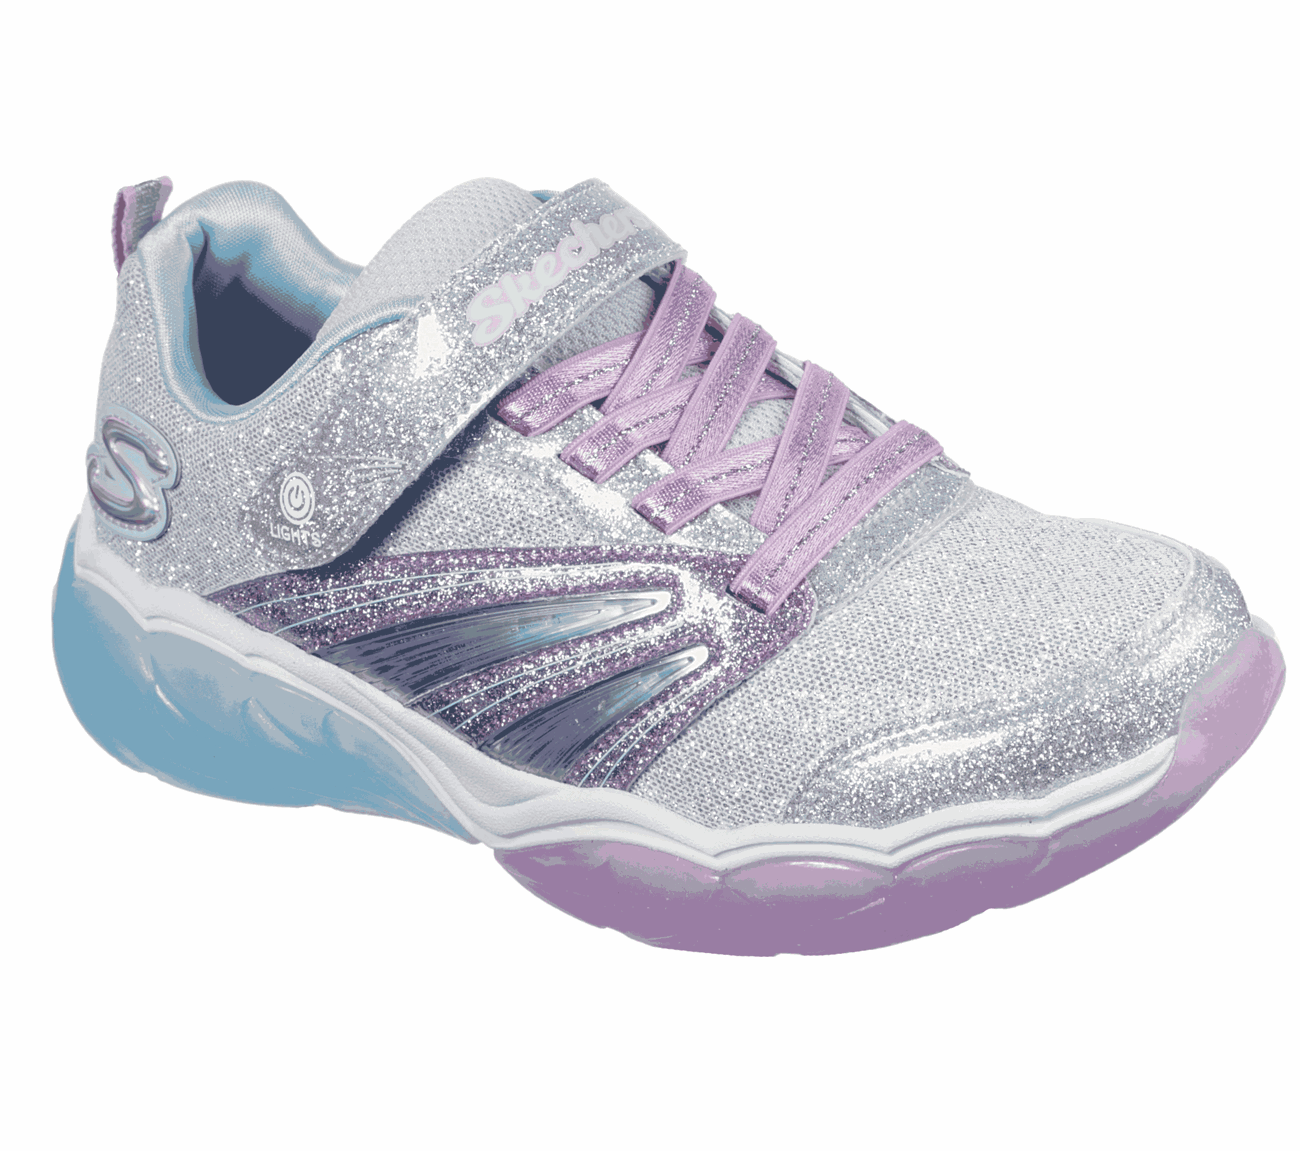 skechers fusion sneakers review